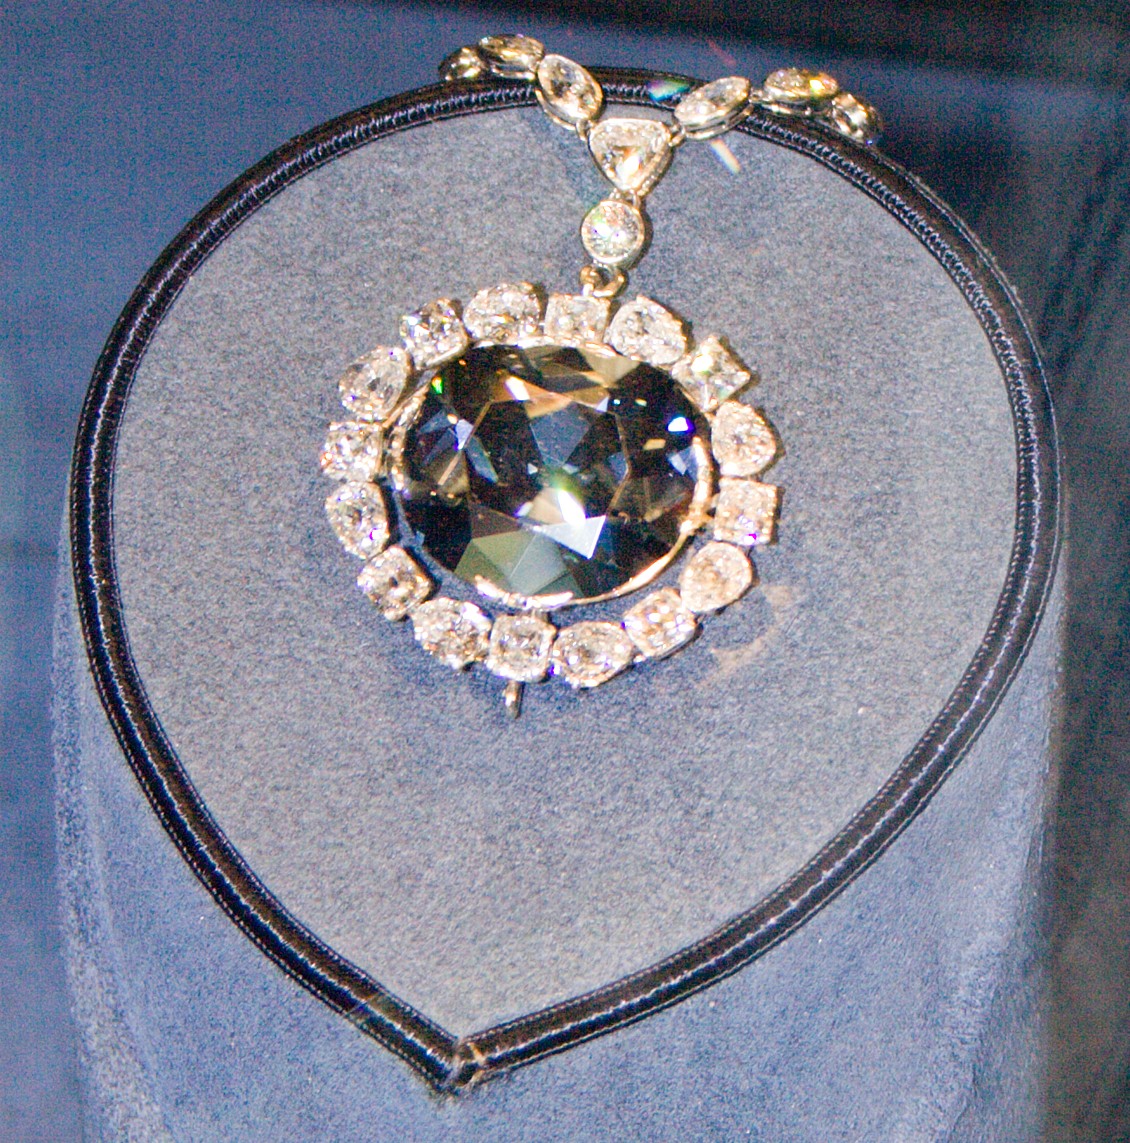 1958: Most Famous Diamond in the World Donated to the Smithsonian Museum